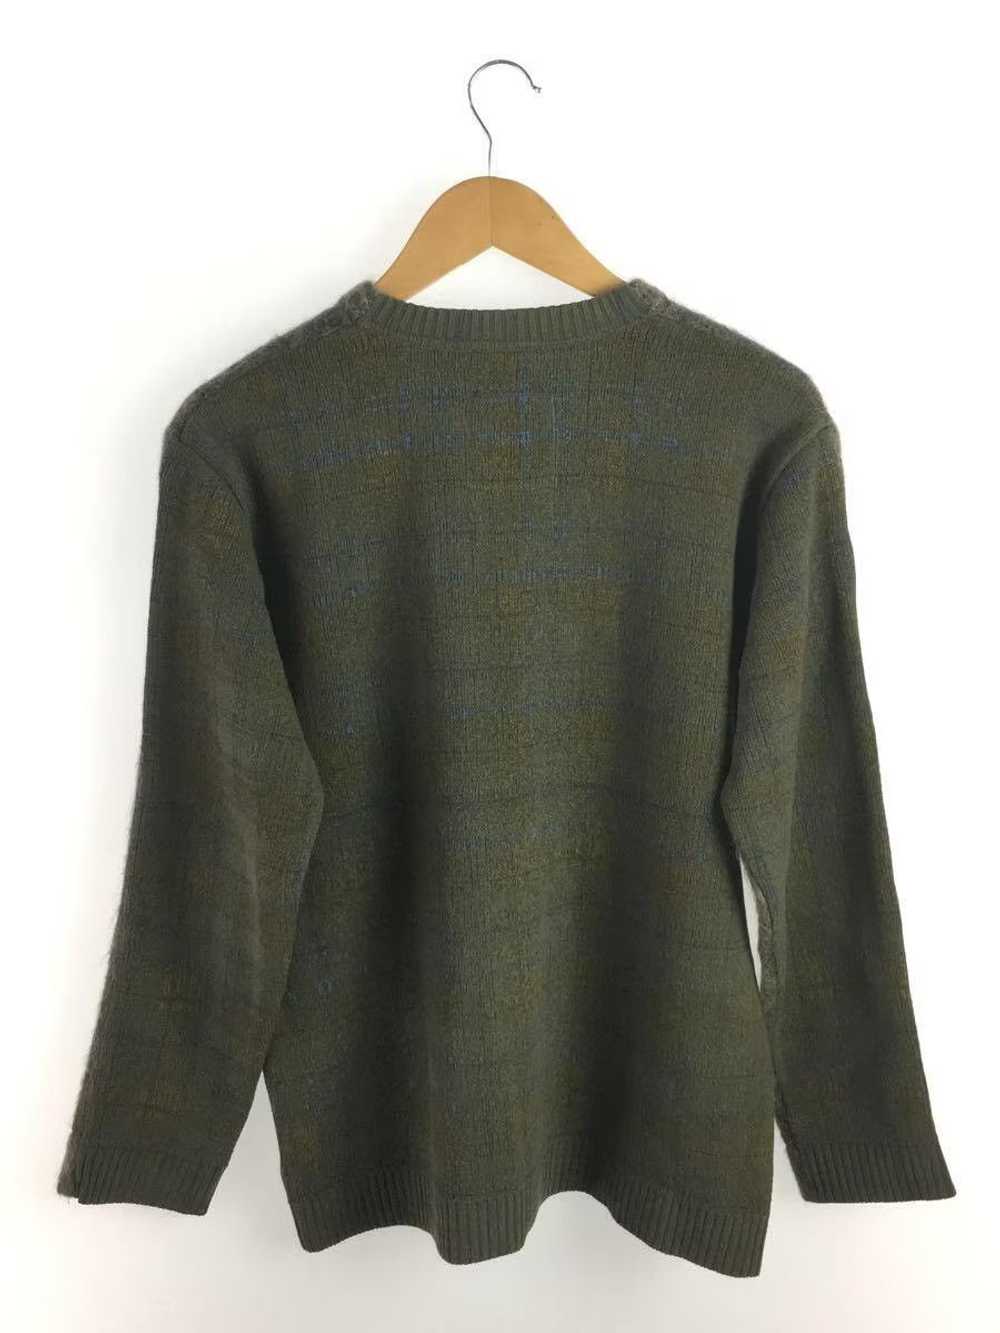 Undercover AW00 "Melting Pot" Mohair Knit Sweater - image 2